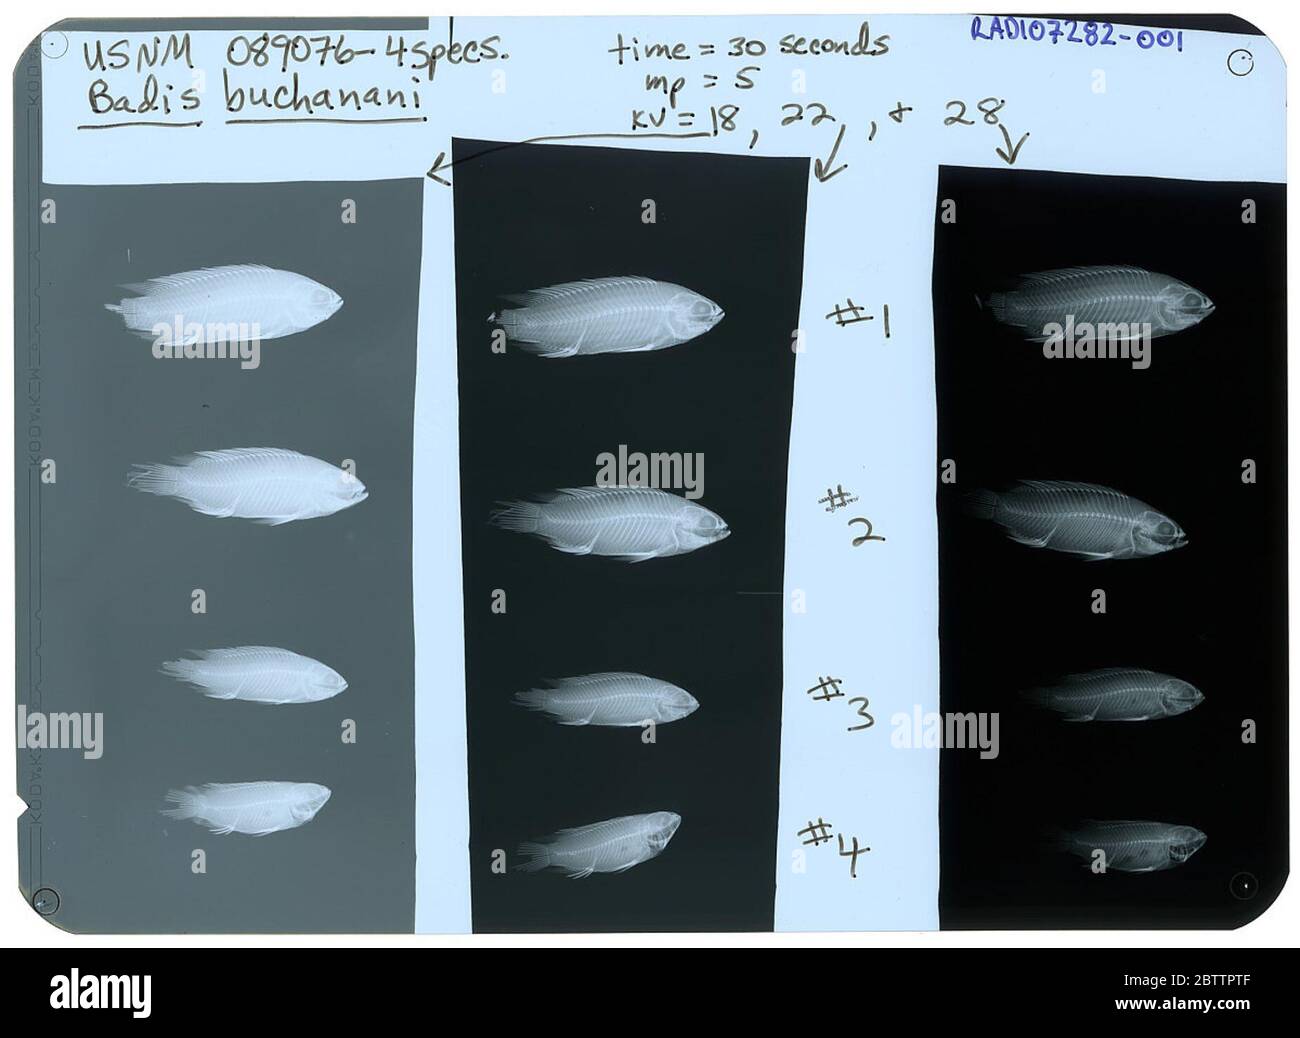 Badis buchanani. 4 specs. x-rayed for v.g. springer nov/2002. Otoliths dissected out by Dirk Nolf, IRSNB, 2007.9 May 20184 Stock Photo